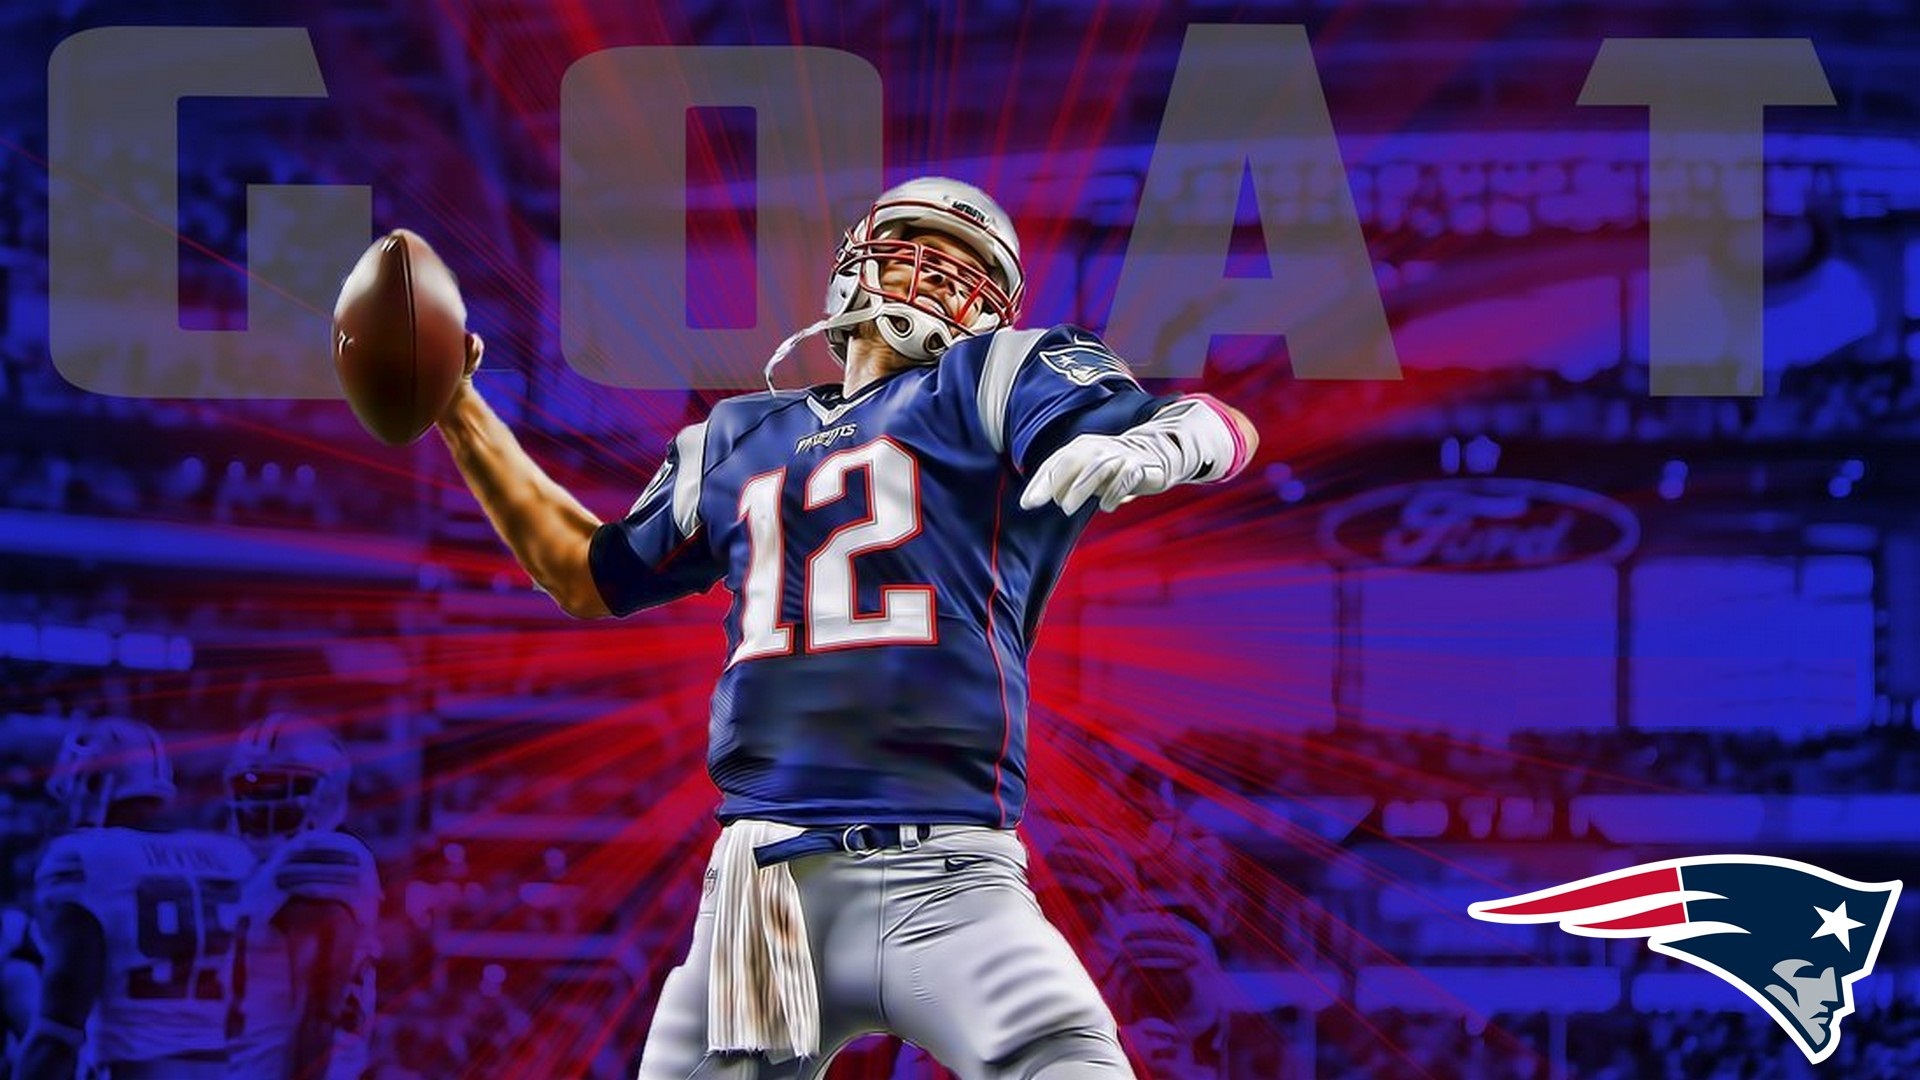 Tom Brady Super Bowl HD Wallpapers with resolution 1920x1080 pixel. You can make this wallpaper for your Mac or Windows Desktop Background, iPhone, Android or Tablet and another Smartphone device